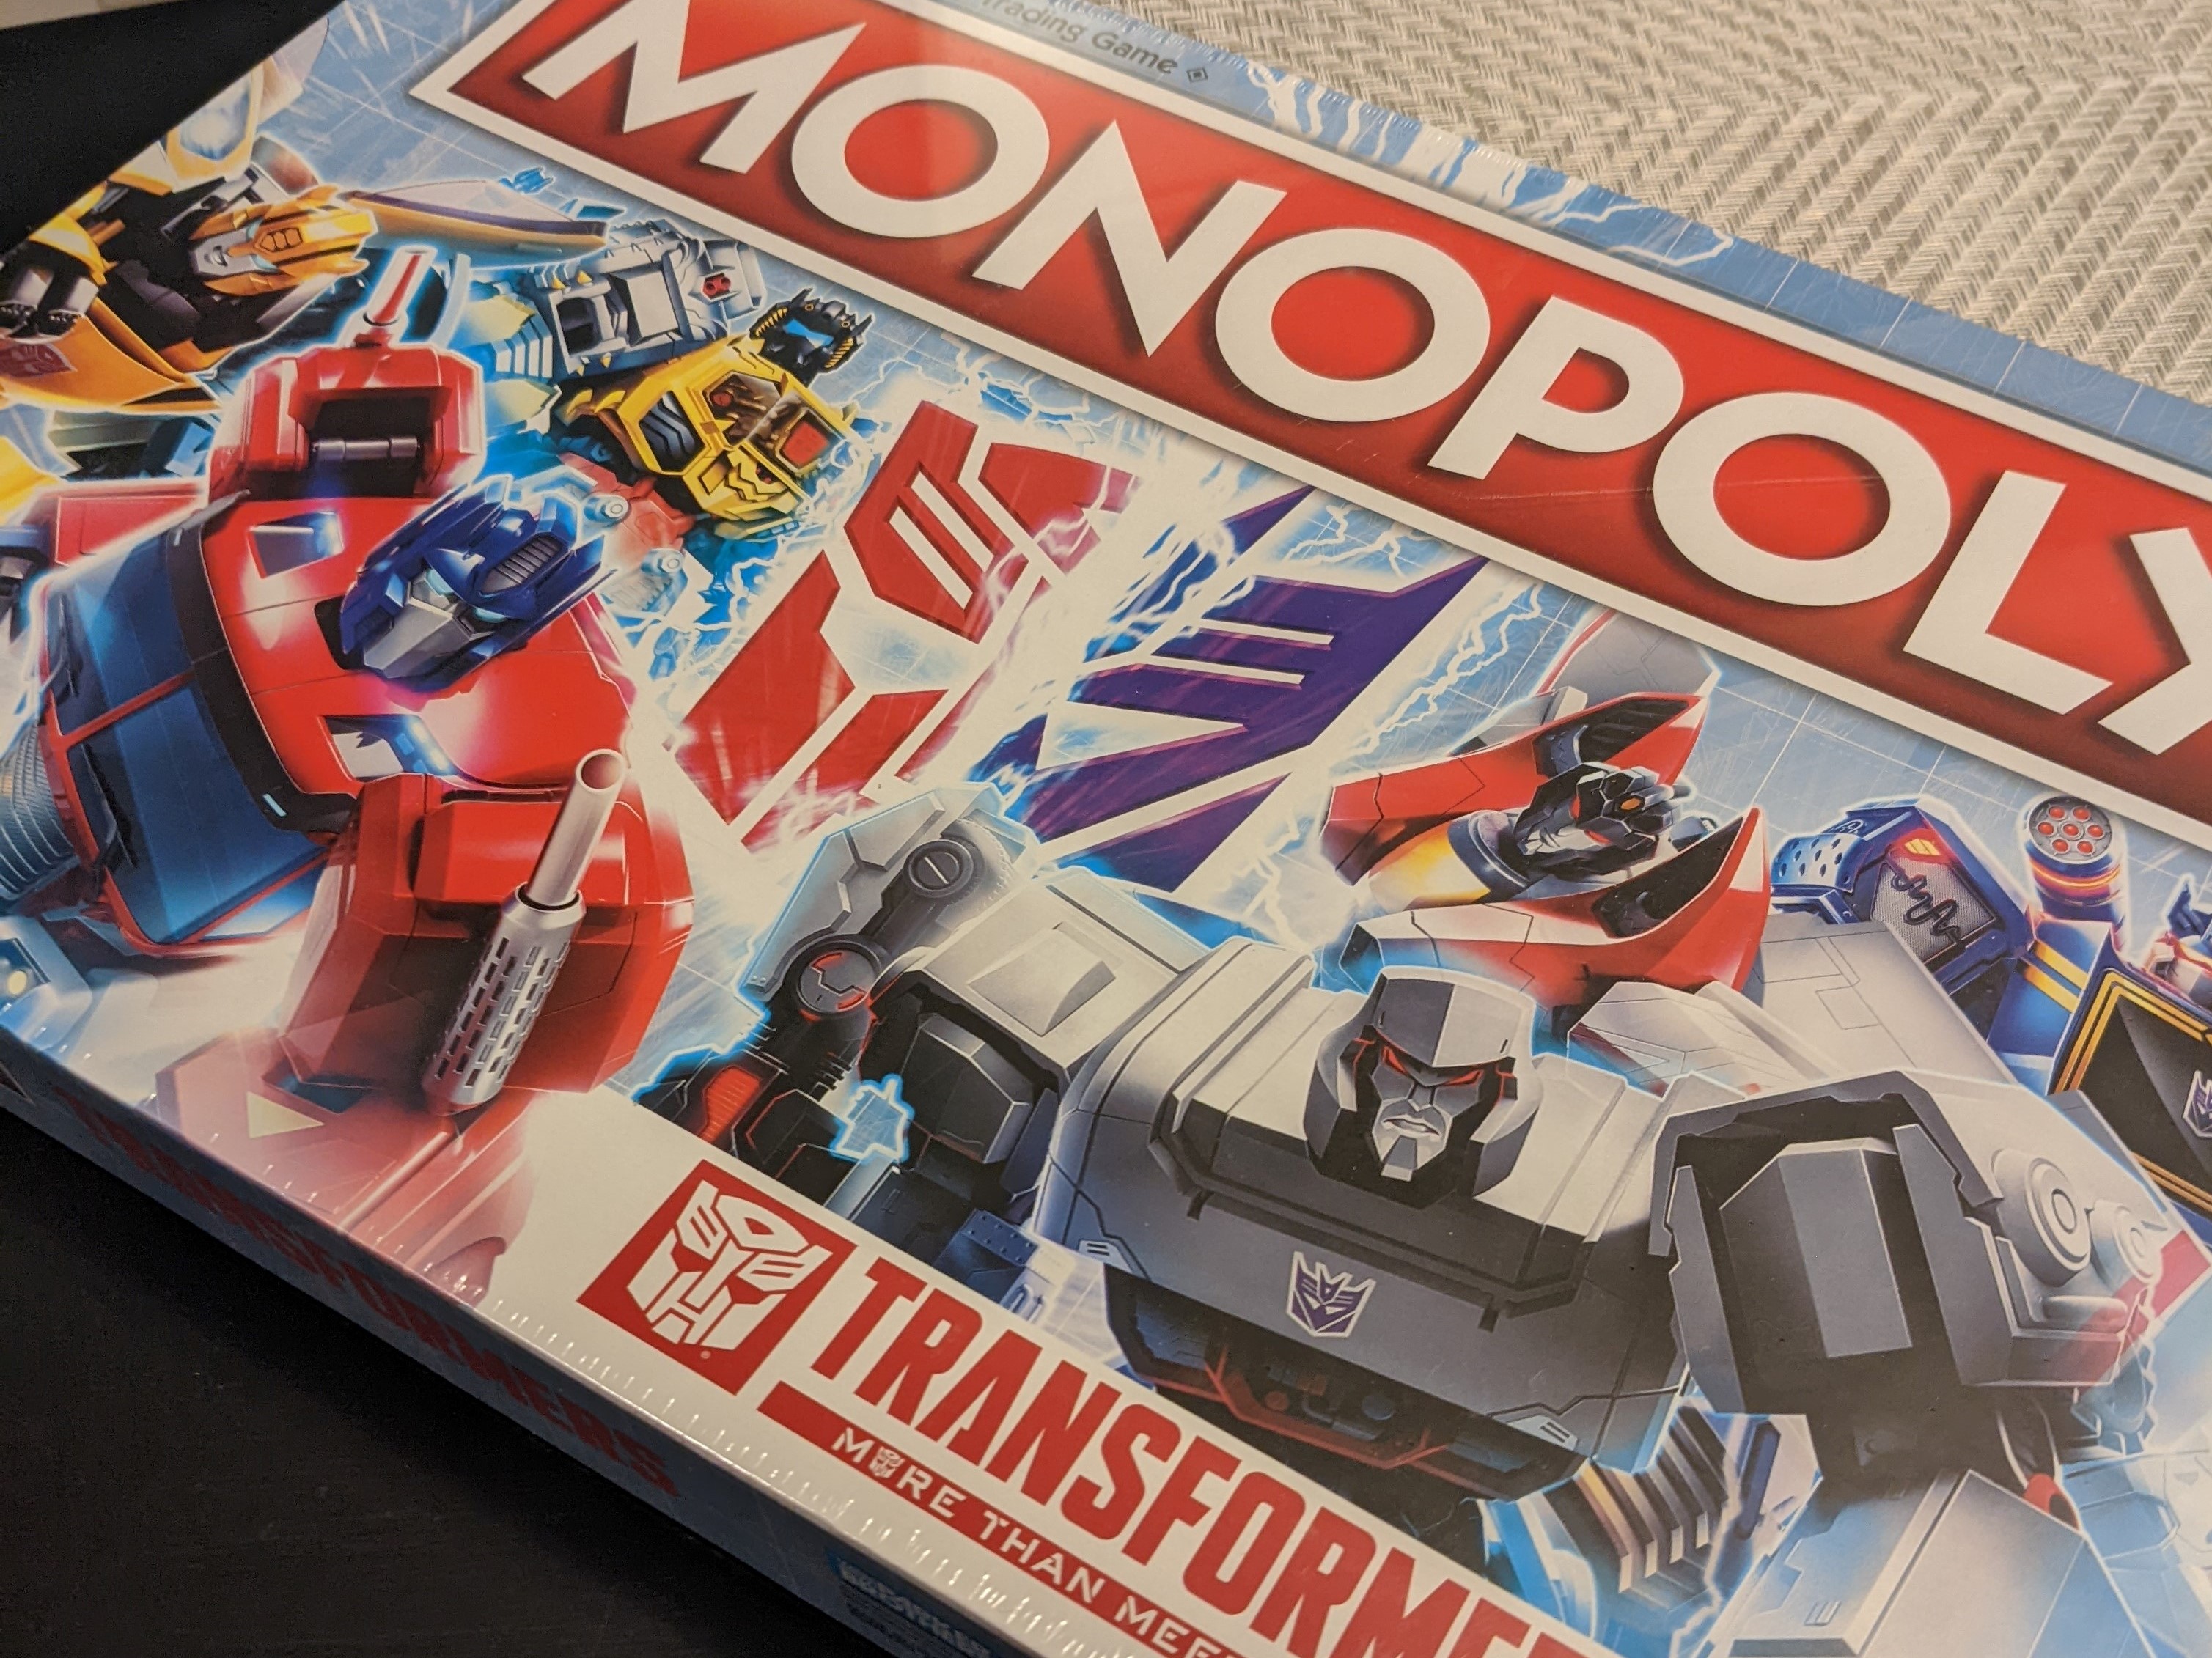 Monopoly: Transformers Edition